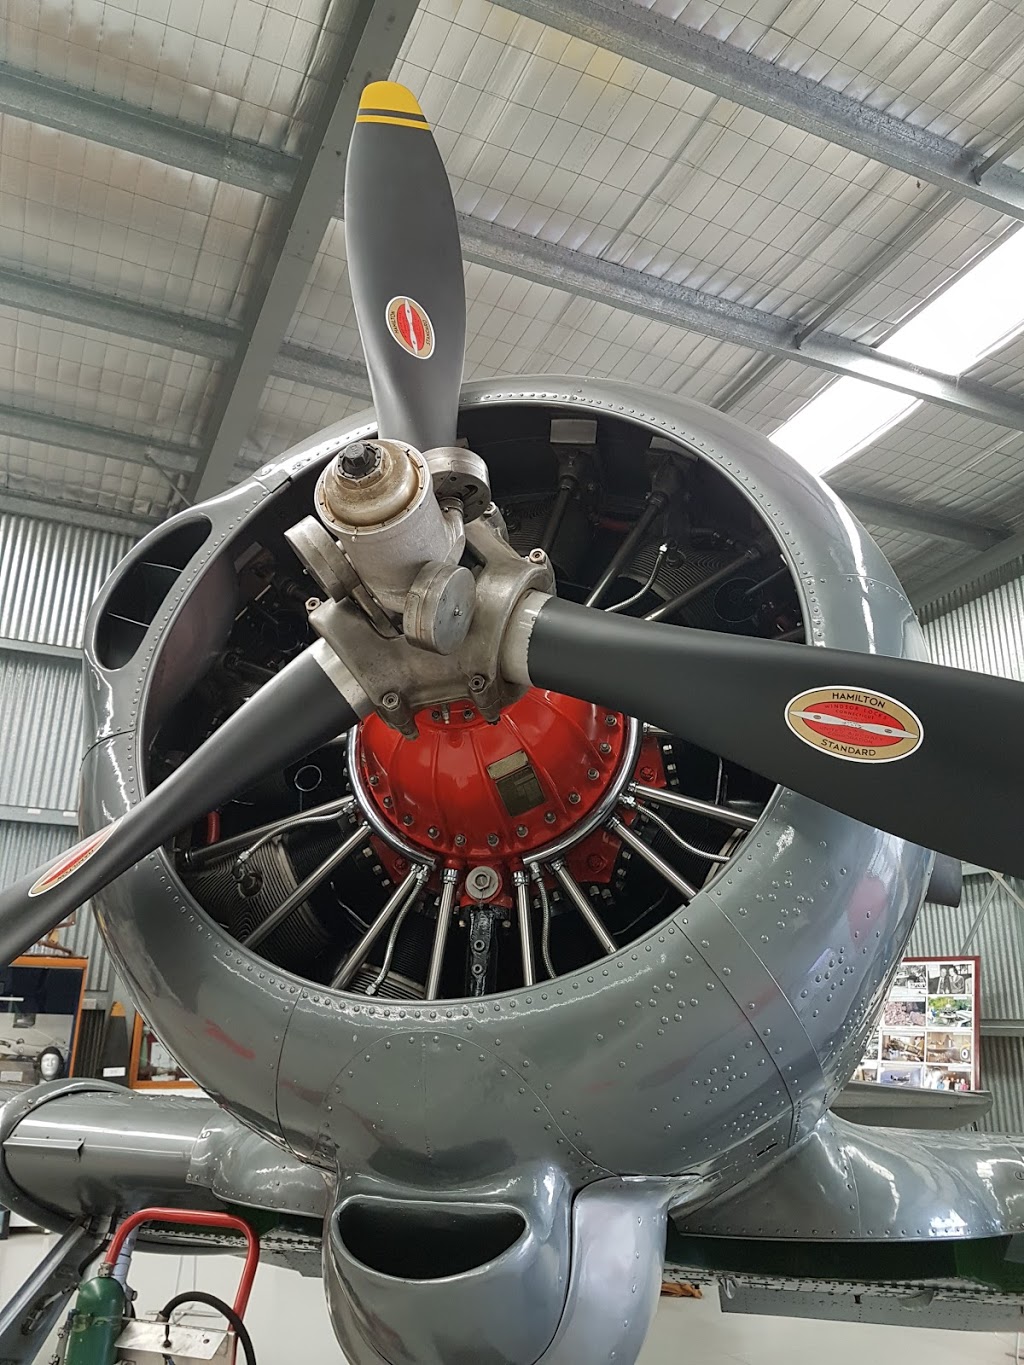 Nhill Aviation Heritage Centre | museum | Nhill VIC 3418, Australia | 0490657770 OR +61 490 657 770